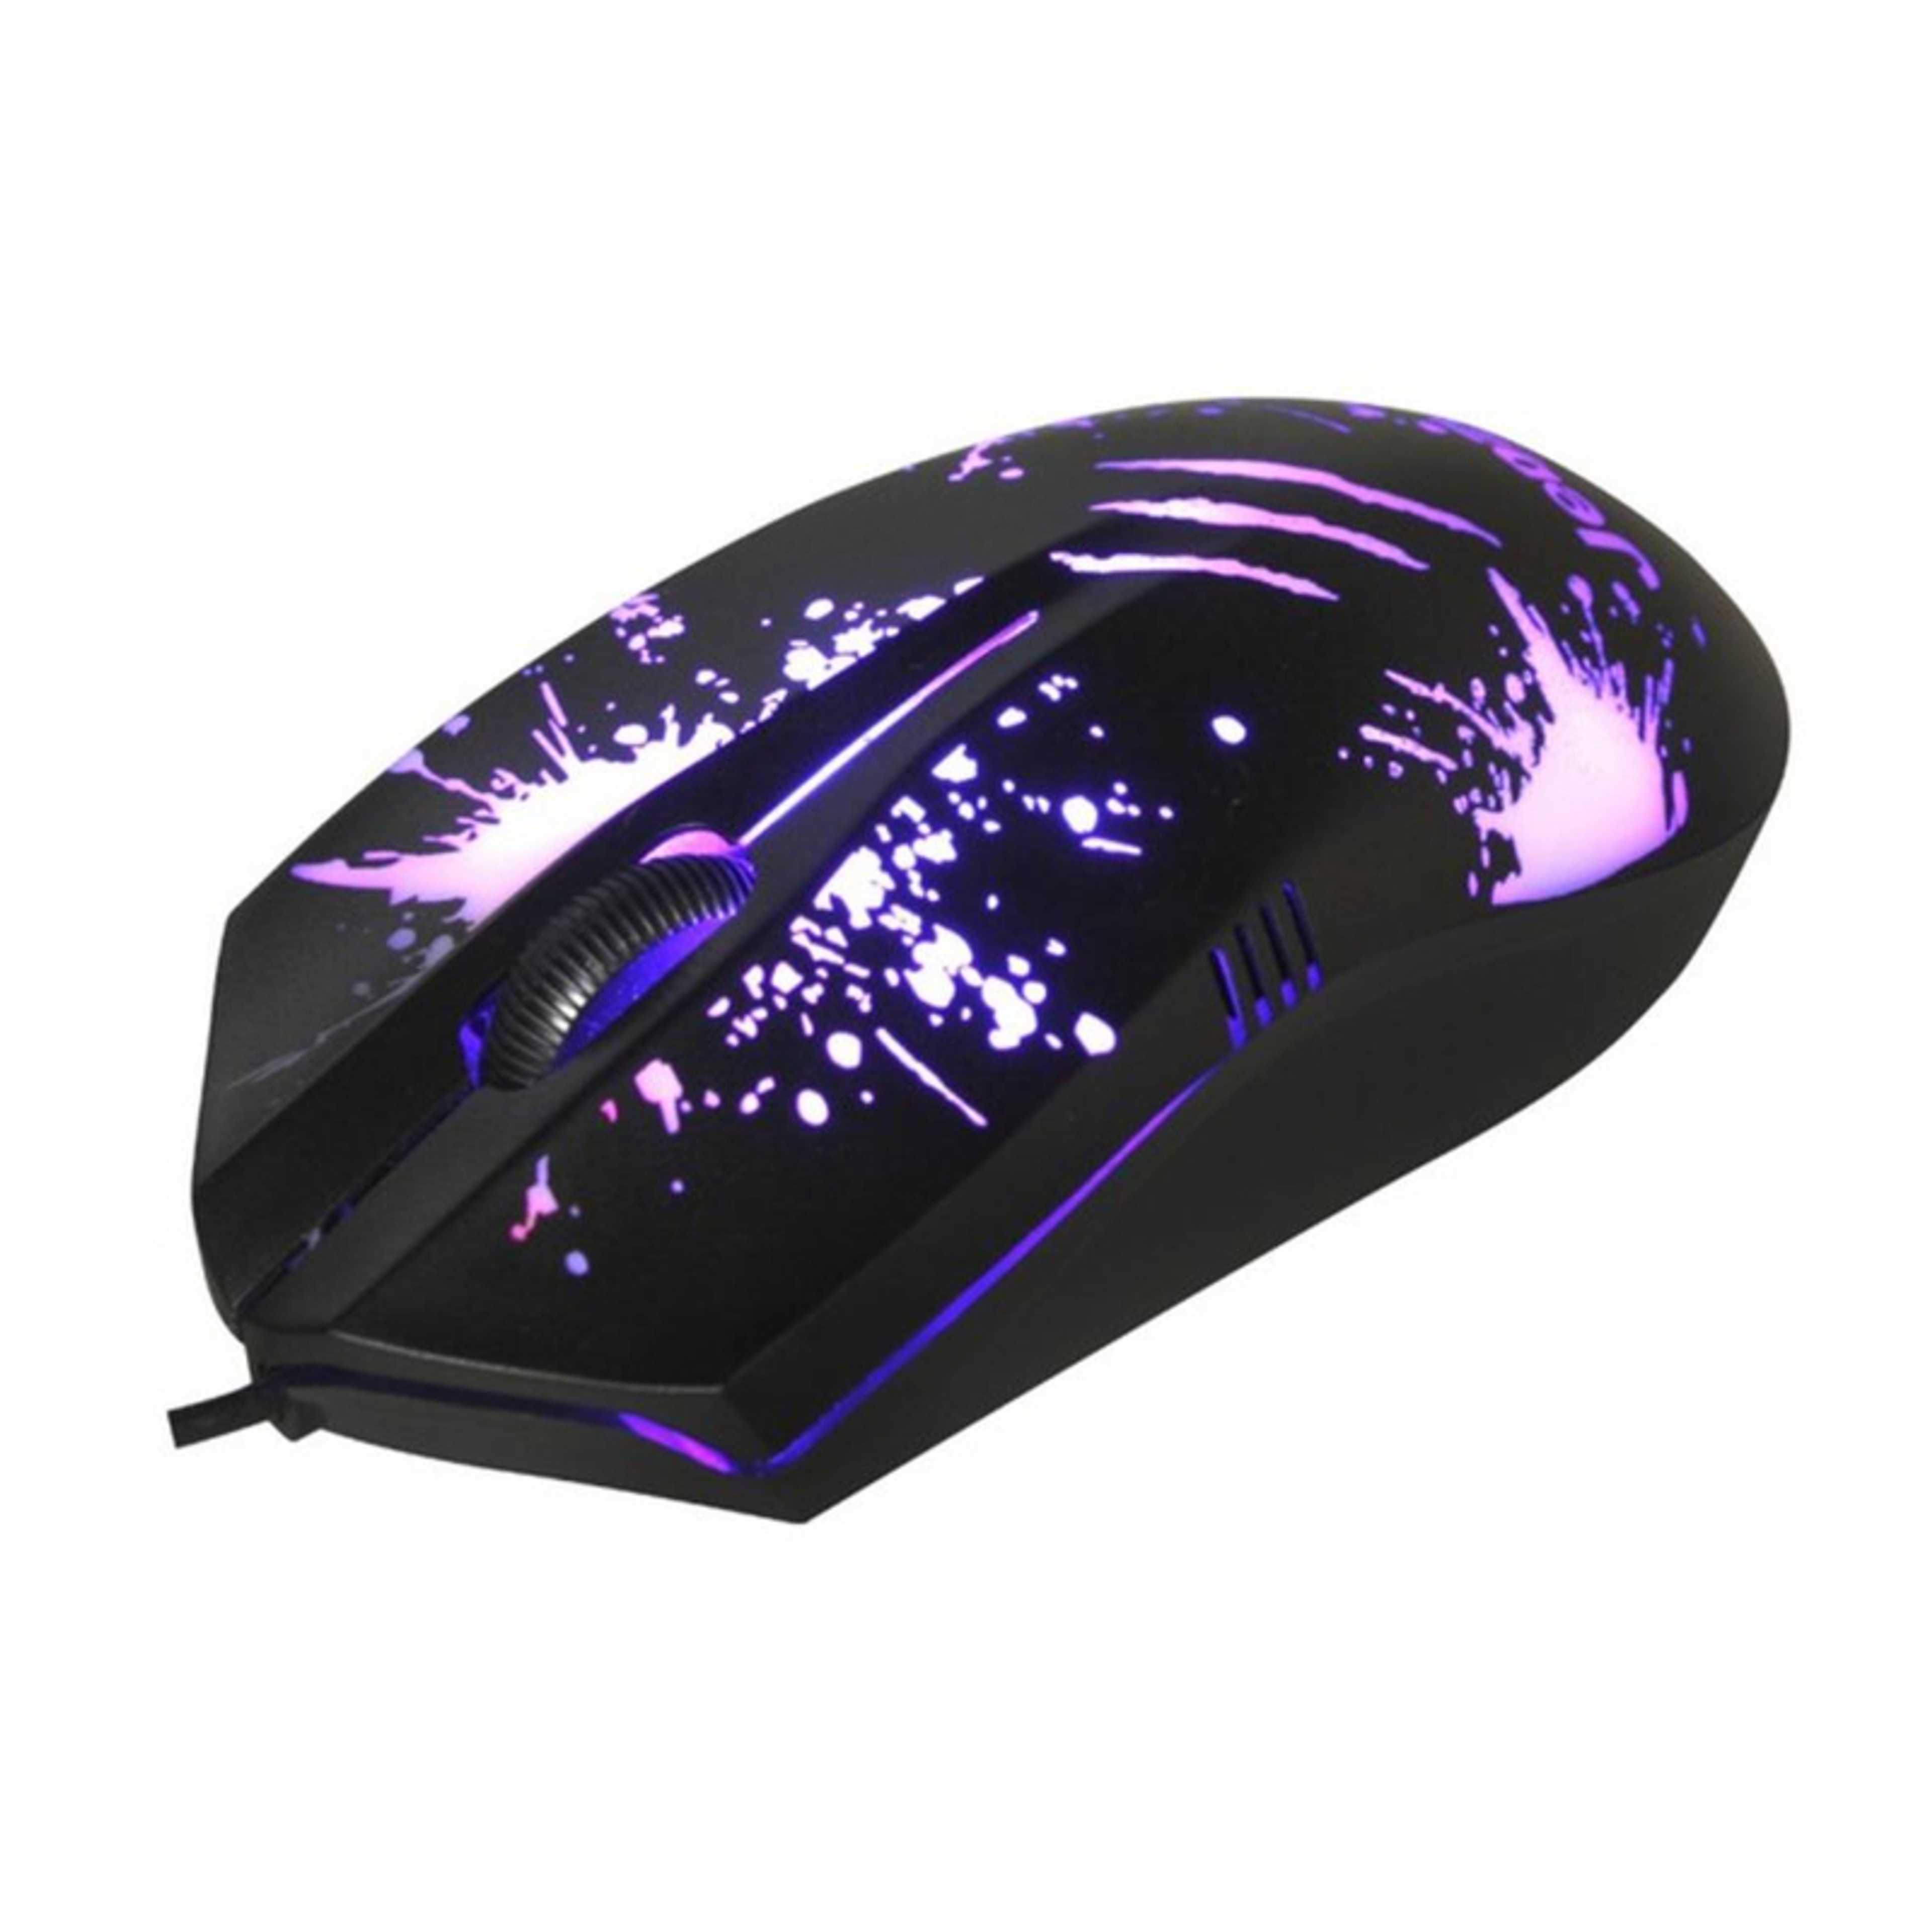 Jedel GM850 USB Gaming Mouse LED Lighting Wired Optical Mouse